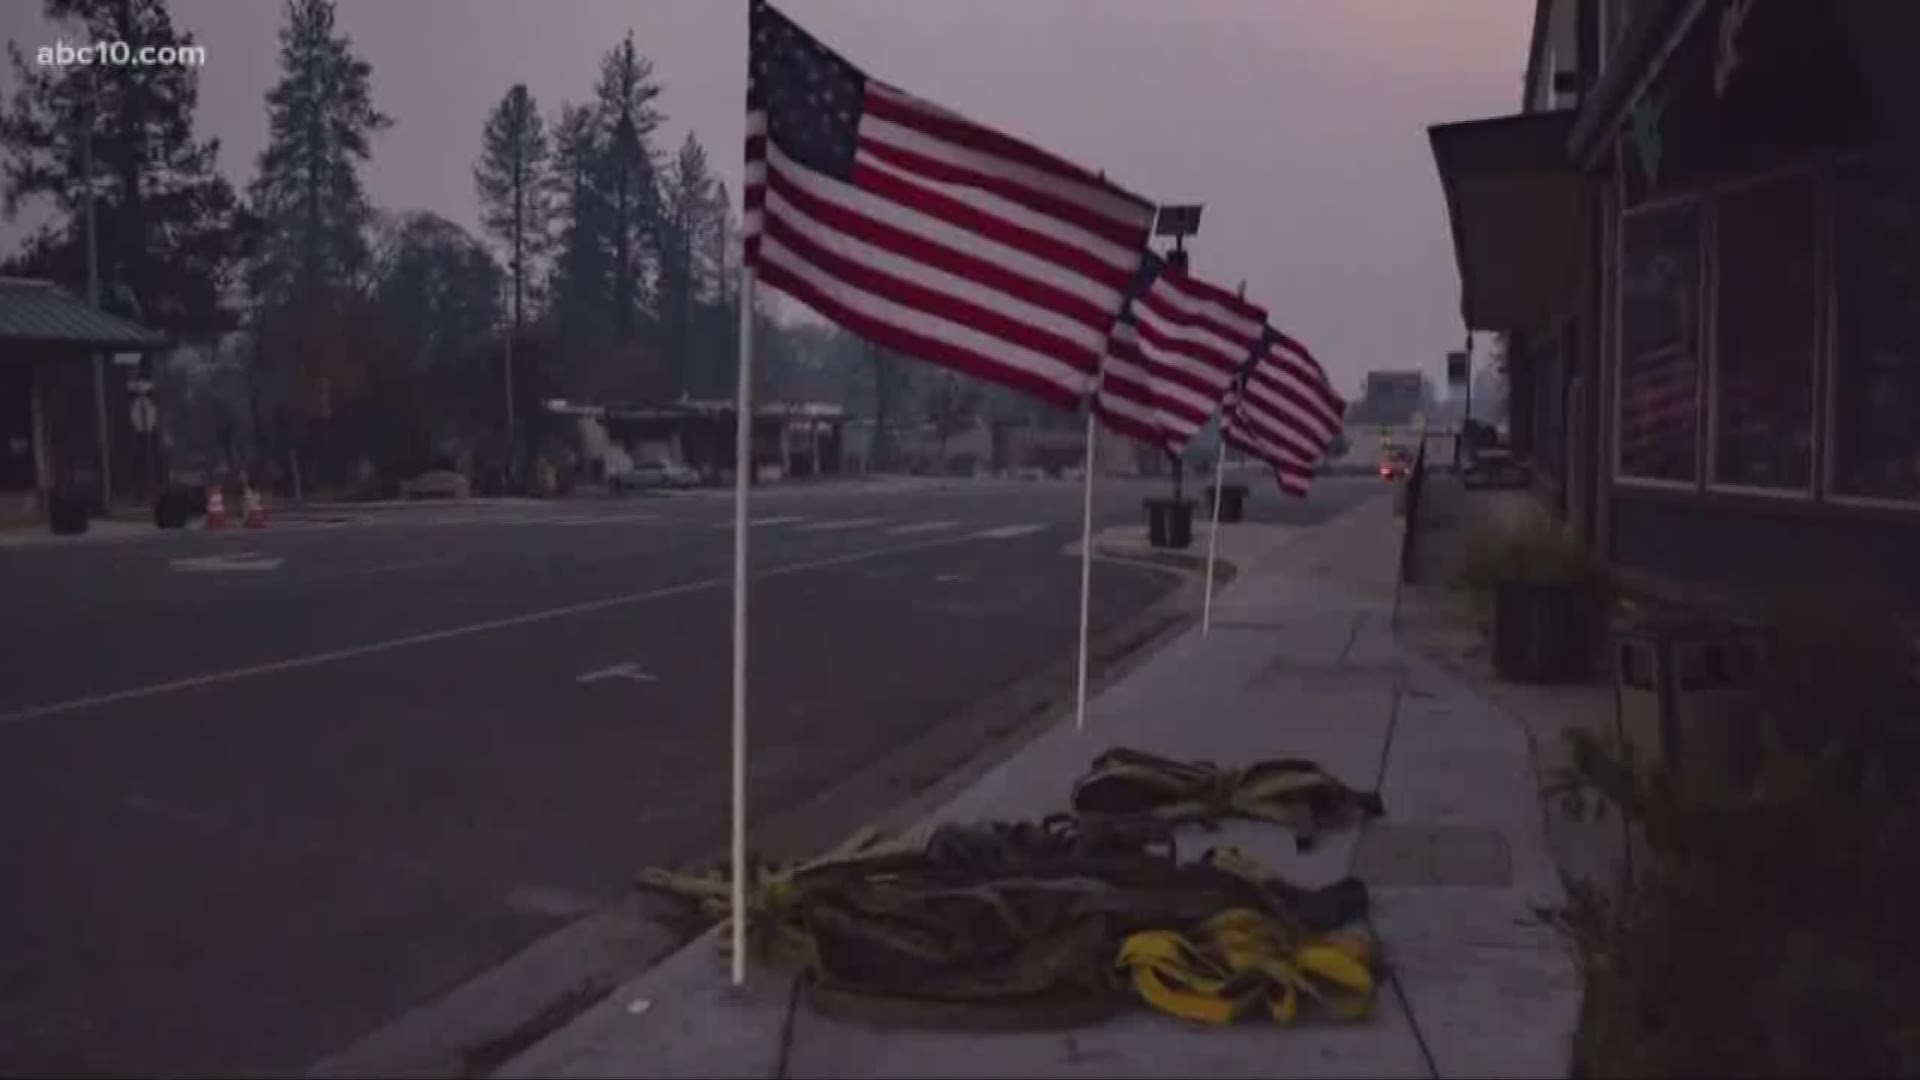 There is a long standing tradition in the town of Paradise. Every Veterans Day, the town raises flags along the main road to honor those who served. This yer, despite the Camp Fire destroying their town, the community continued tradition.